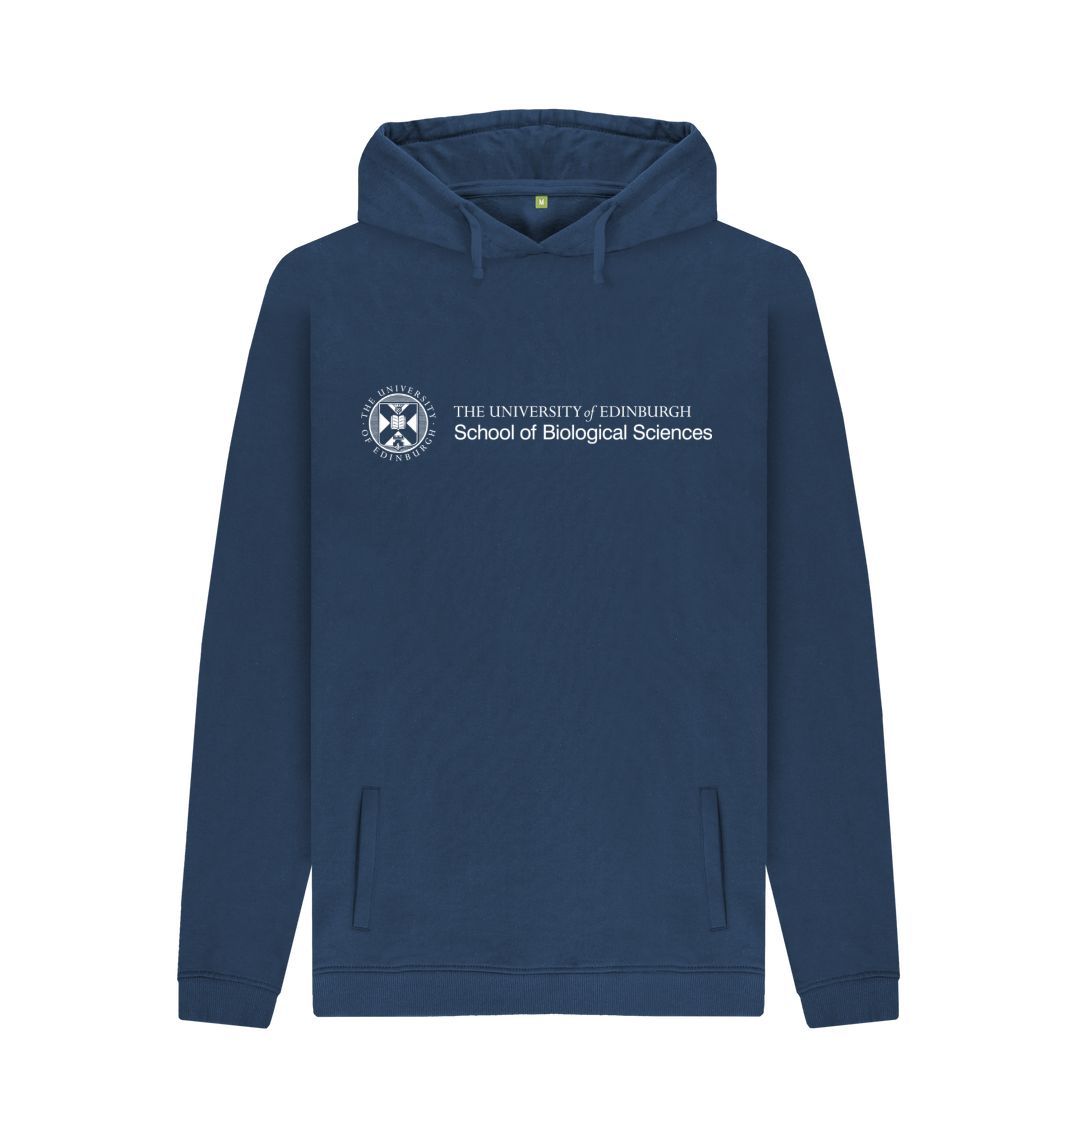 Navy Hoodie with white University crest and text that reads ' University of Edinburgh : School of Biological Sciences'